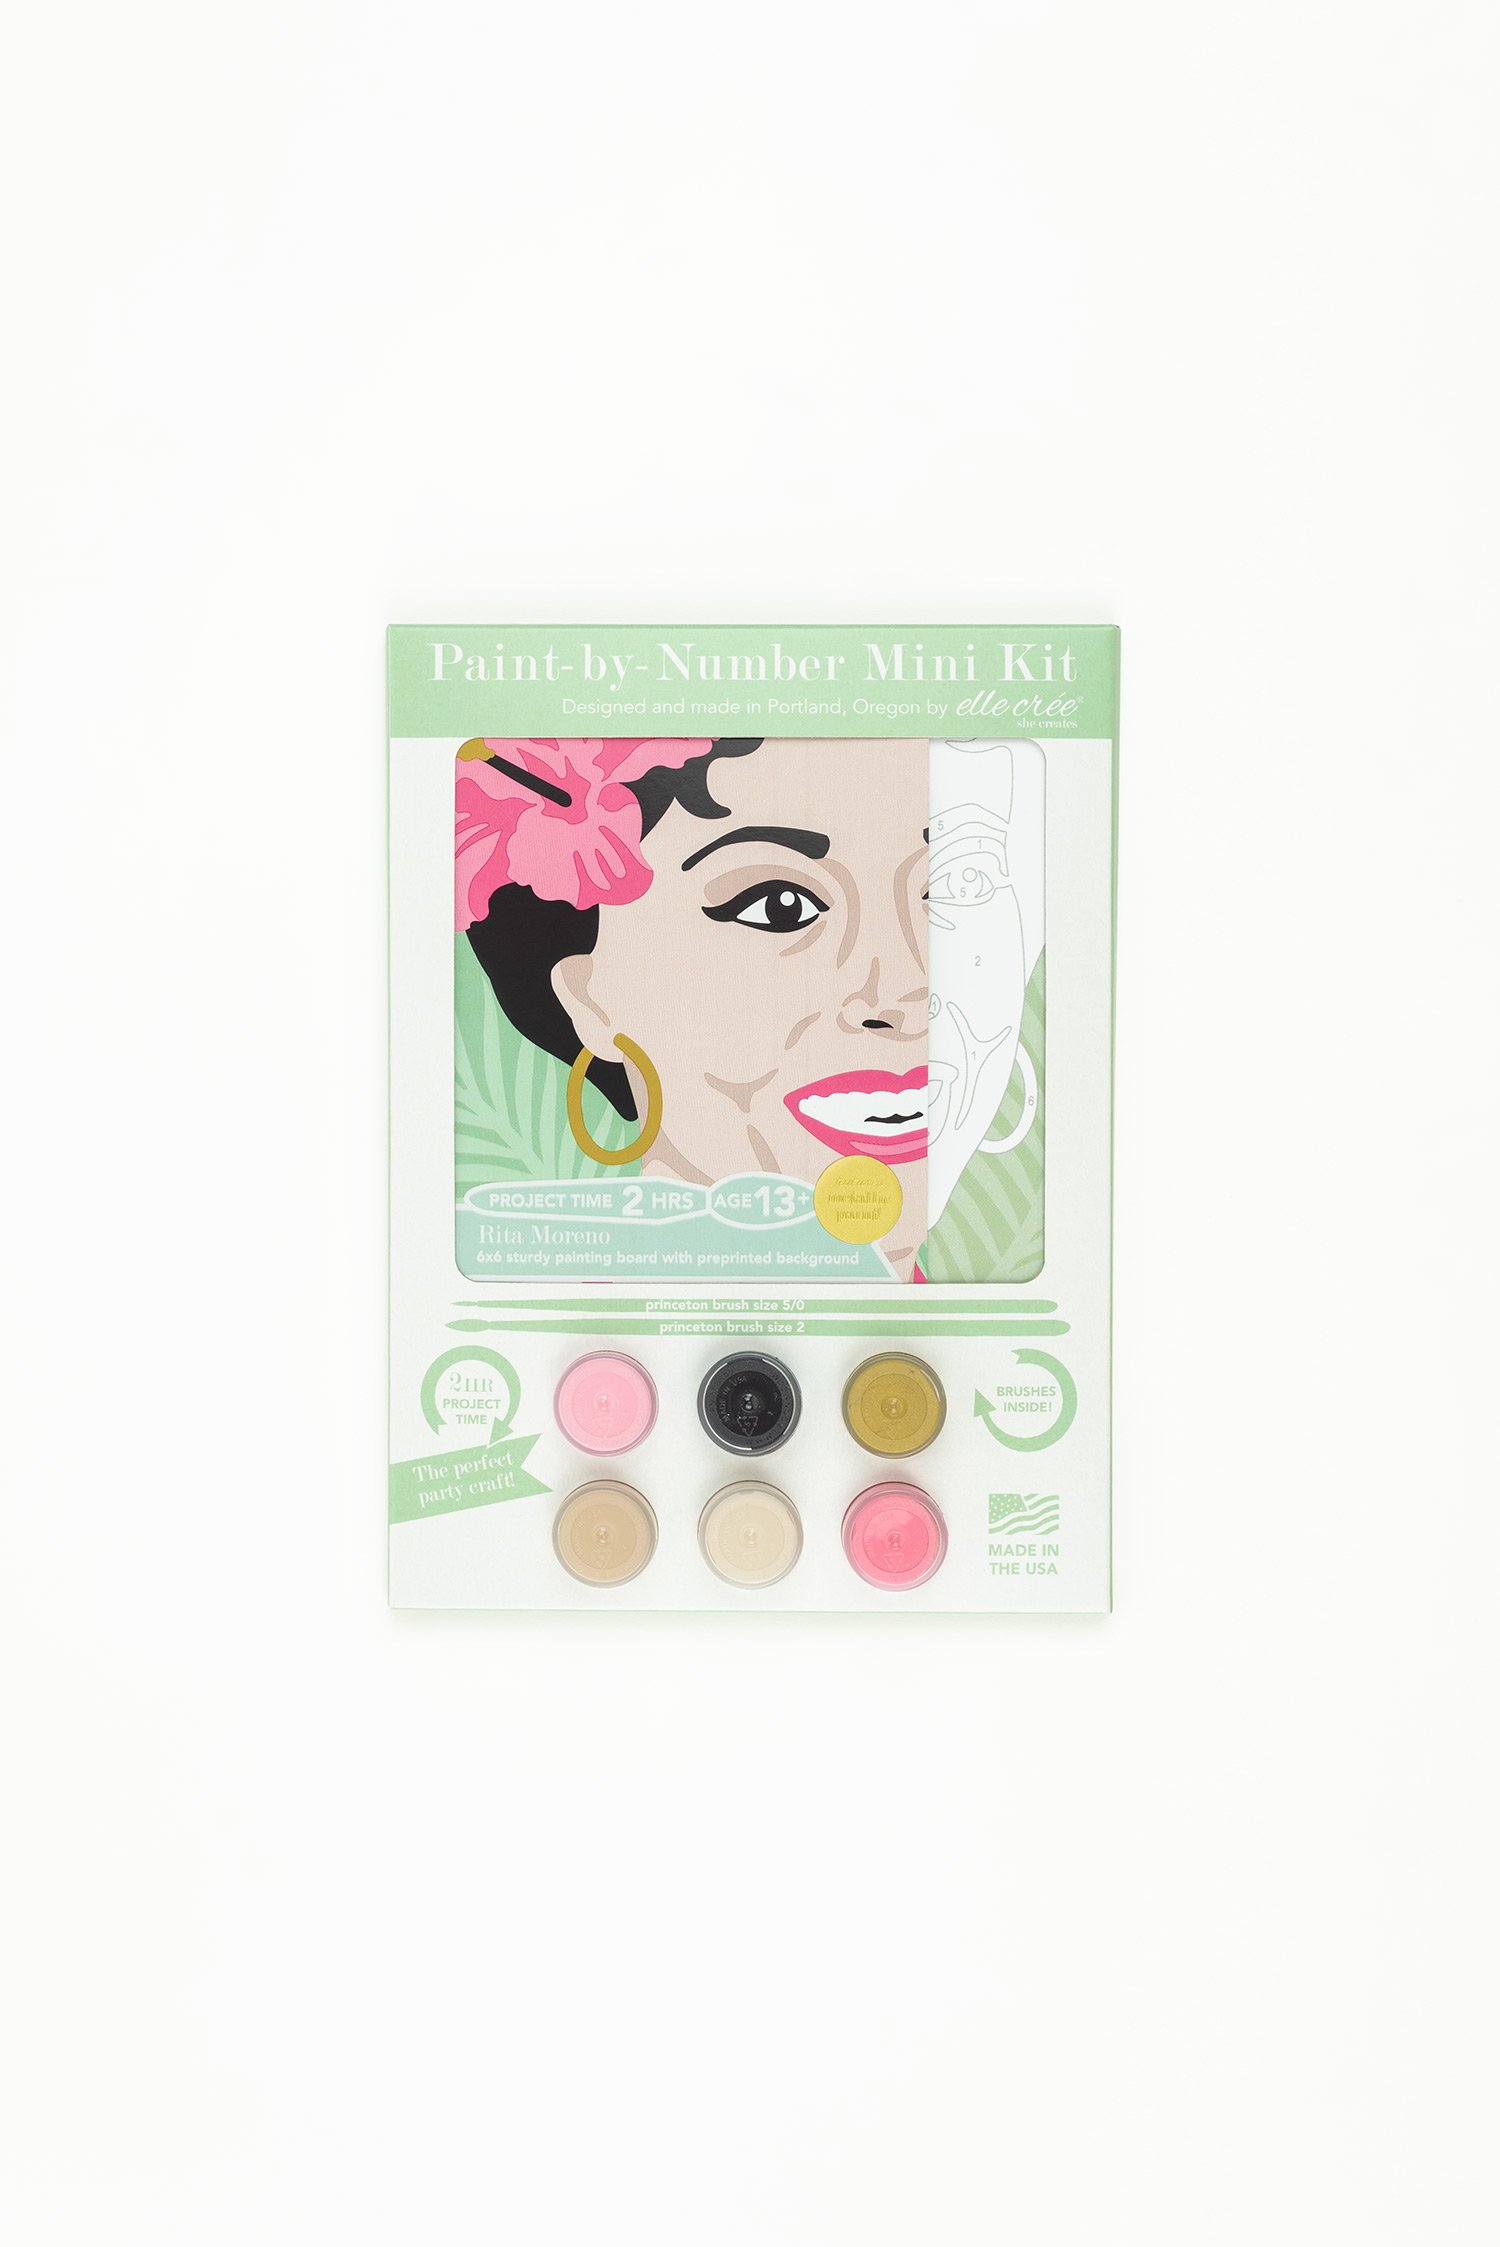 Rita Moreno | Mini Paint-by-Number Kit for Adults — Elle Crée (she creates)